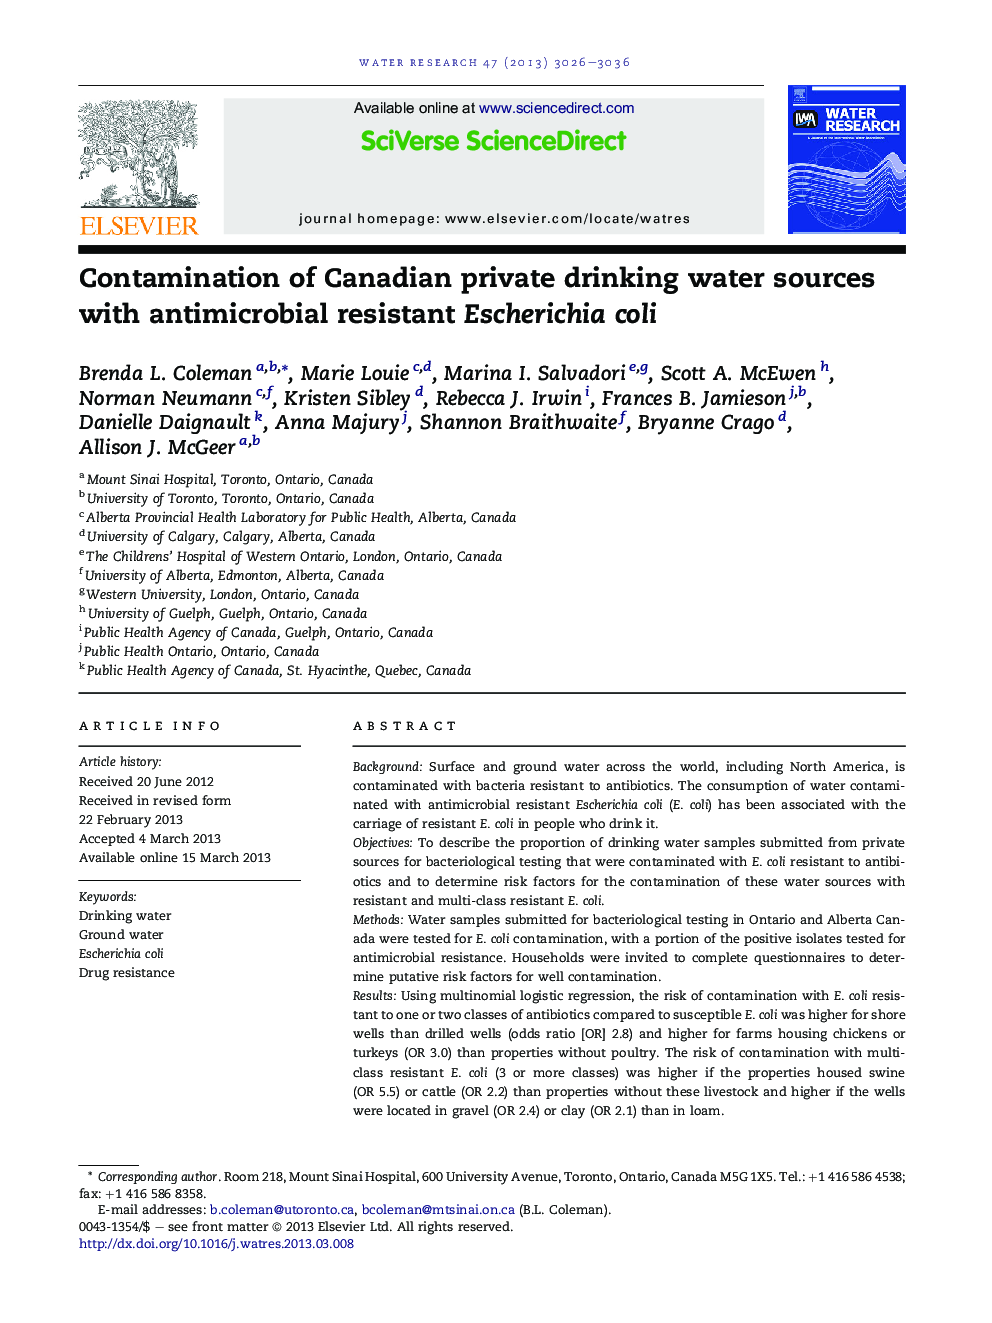 Contamination of Canadian private drinking water sources with antimicrobial resistant Escherichia coli